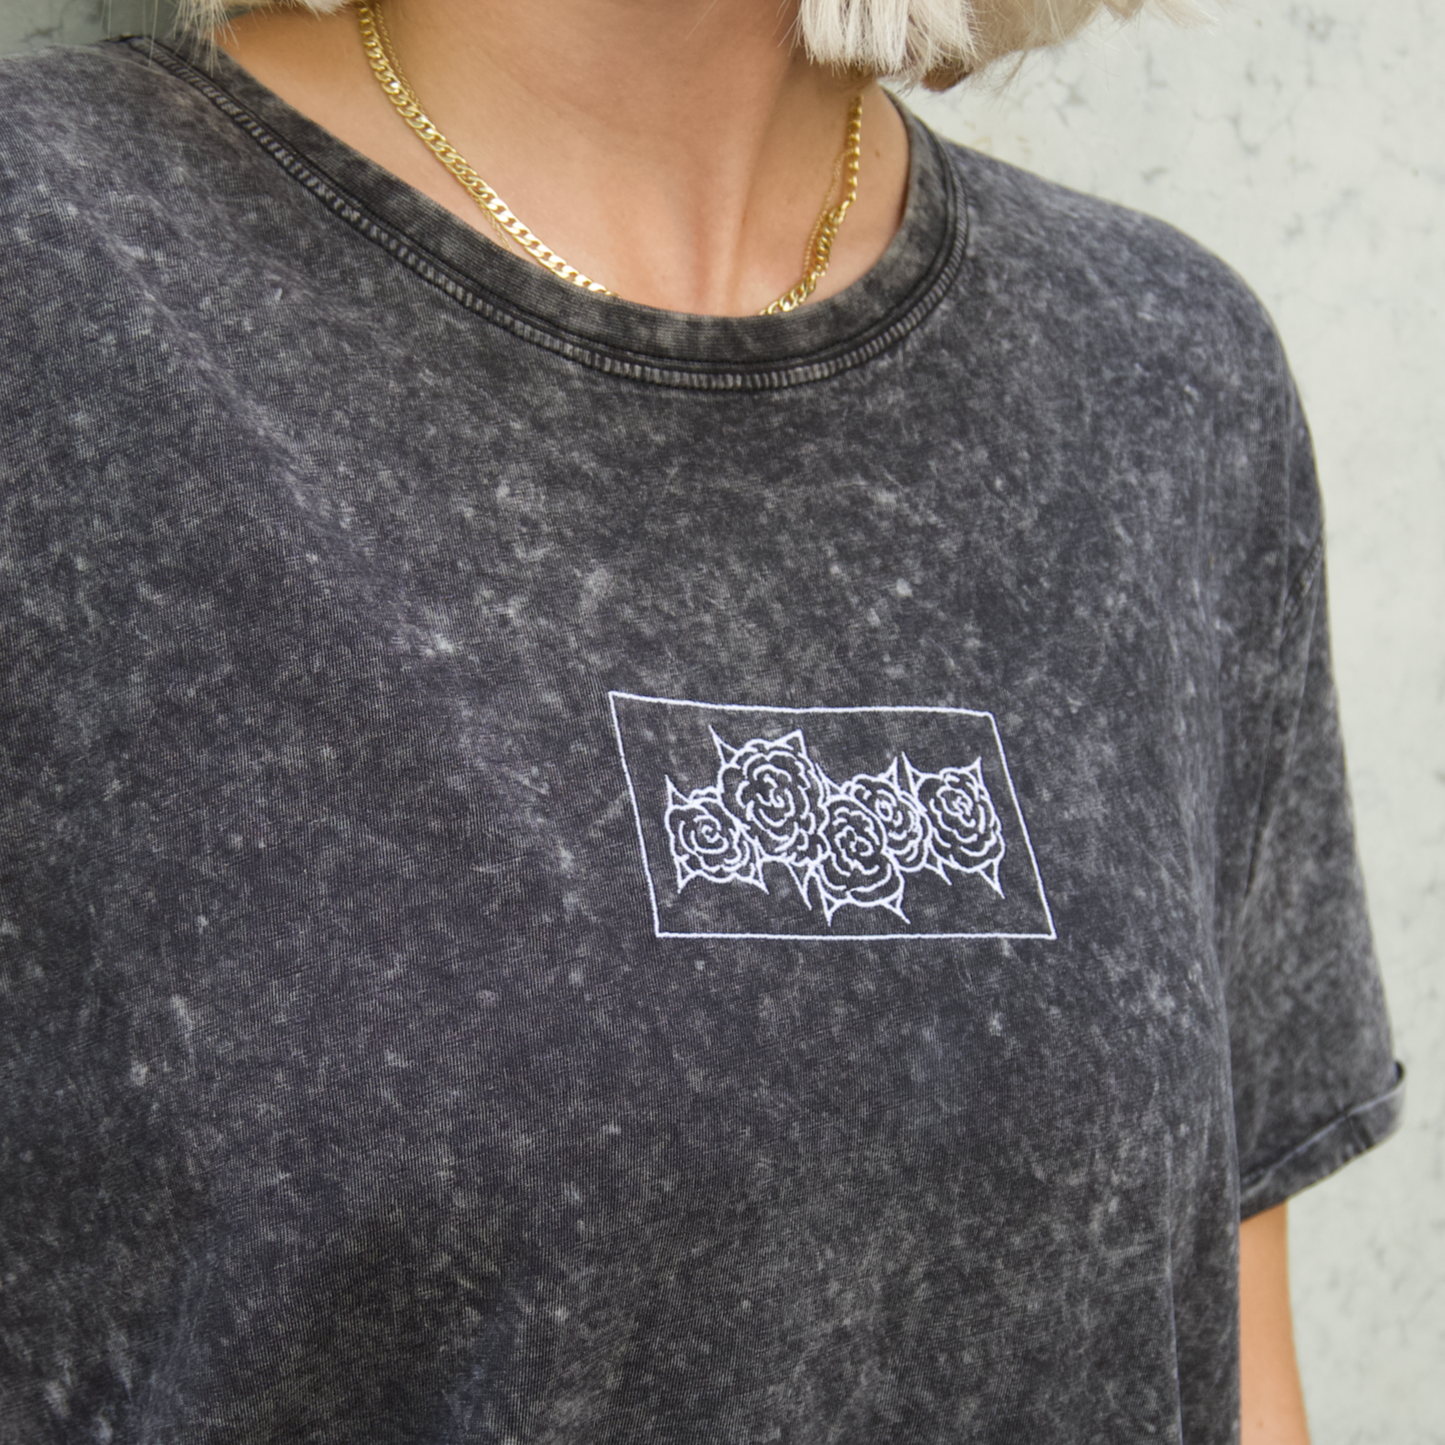 Rot Technique Denim T-Shirt (Embroidered)